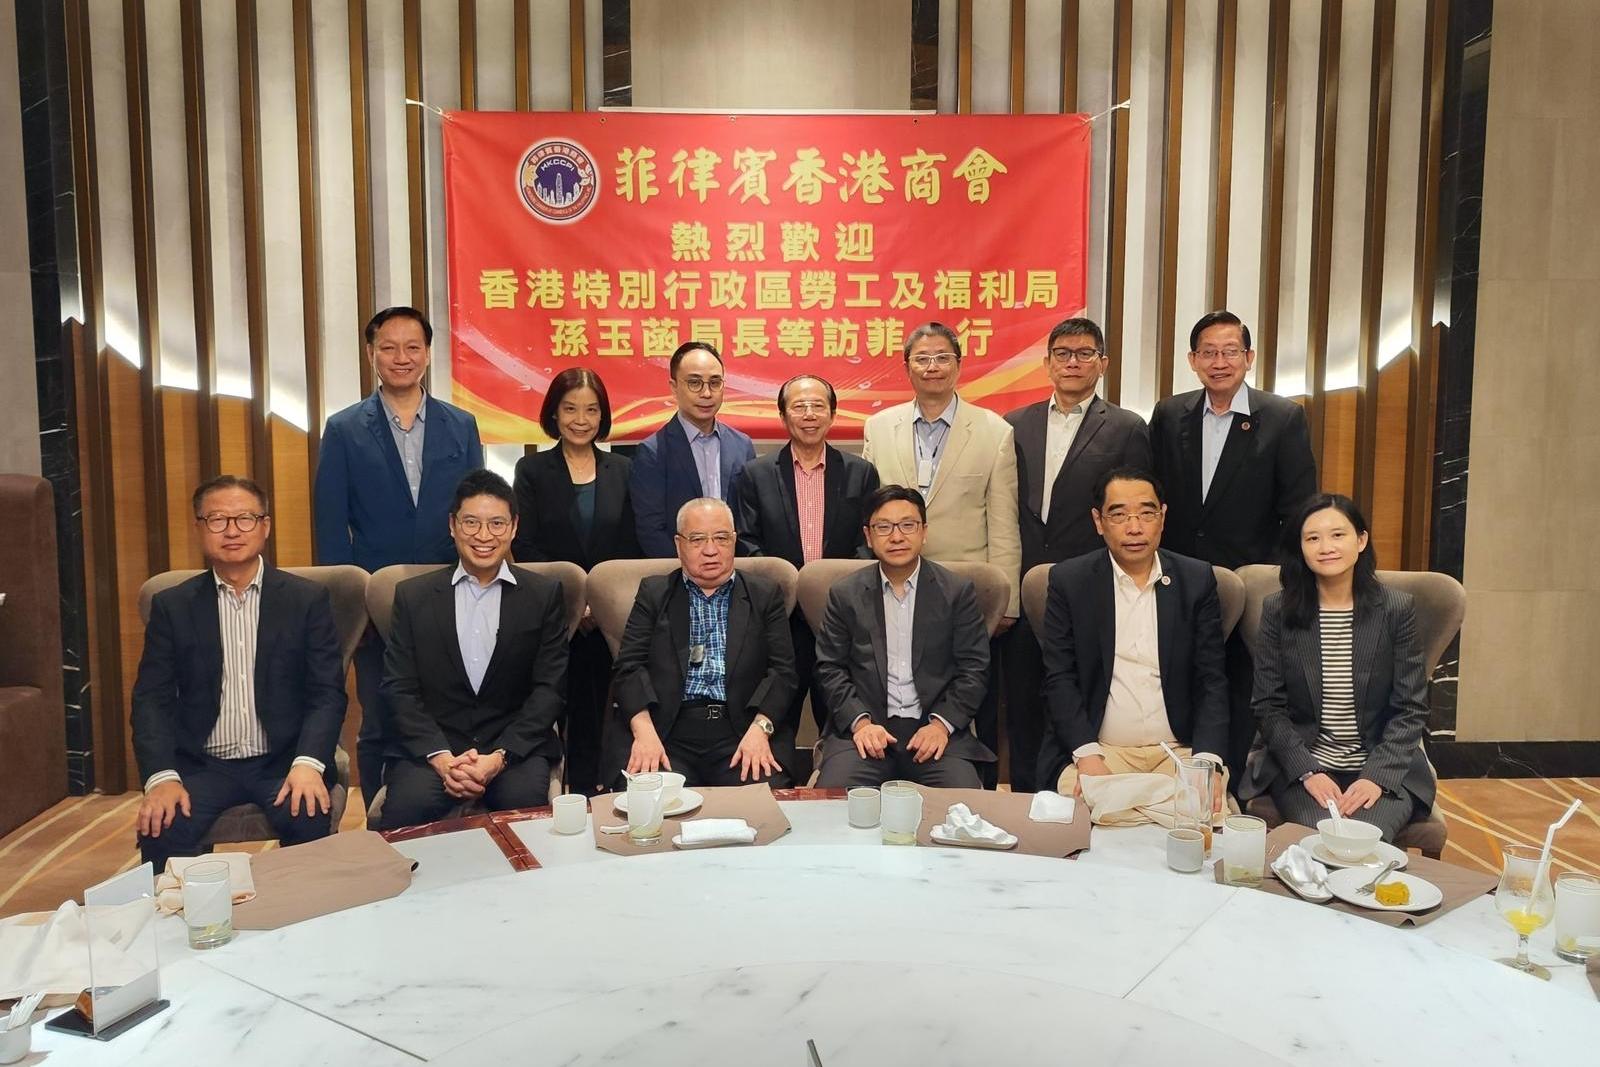 The Secretary for Labour and Welfare, Mr Chris Sun, had a dinner gathering with representatives of the Hongkong Chamber of Commerce of the Philippines Inc. (HKCCPI) on January 8 during his visit to Manila, the Philippines, to know about the business and living conditions of Hong Kong people in the Philippines. Photo shows Mr Sun (front row, third right) and the President of the HKCCPI, Mr Tiu Chun Lin (front row, fourth right), with participants.